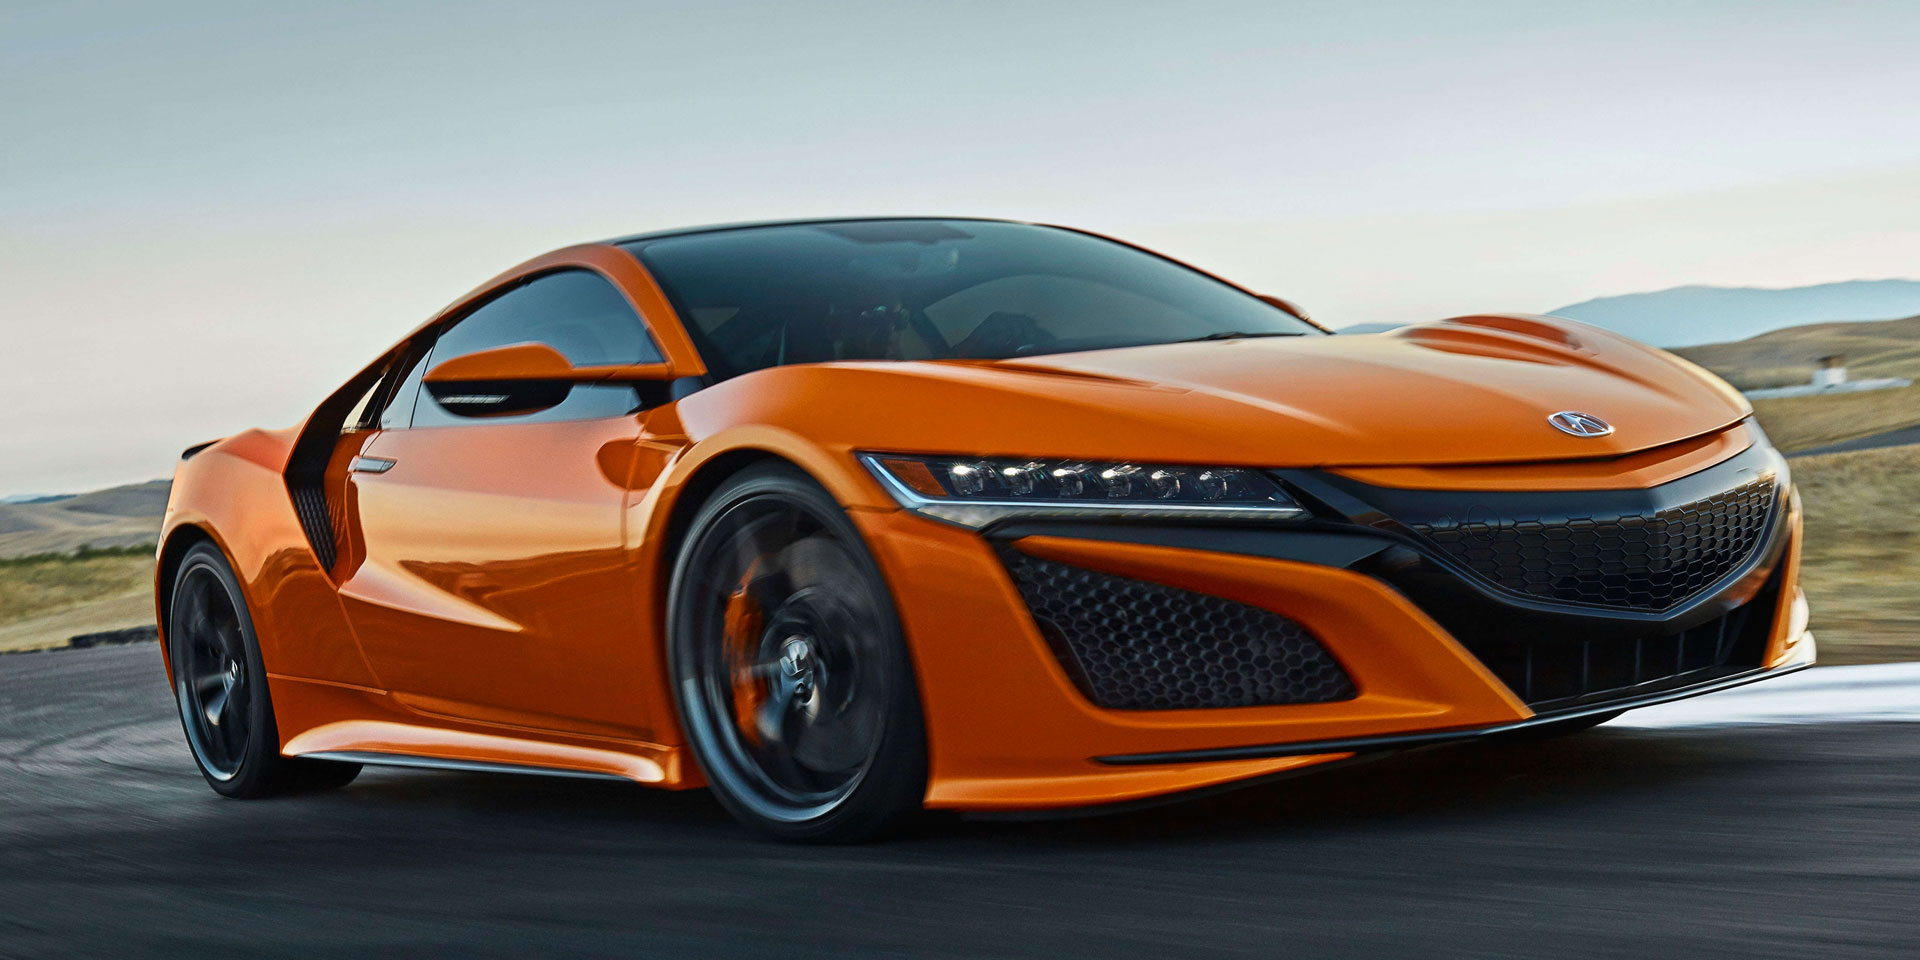 2020 Acura Nsx Vehicles On Display Chicago Auto Show